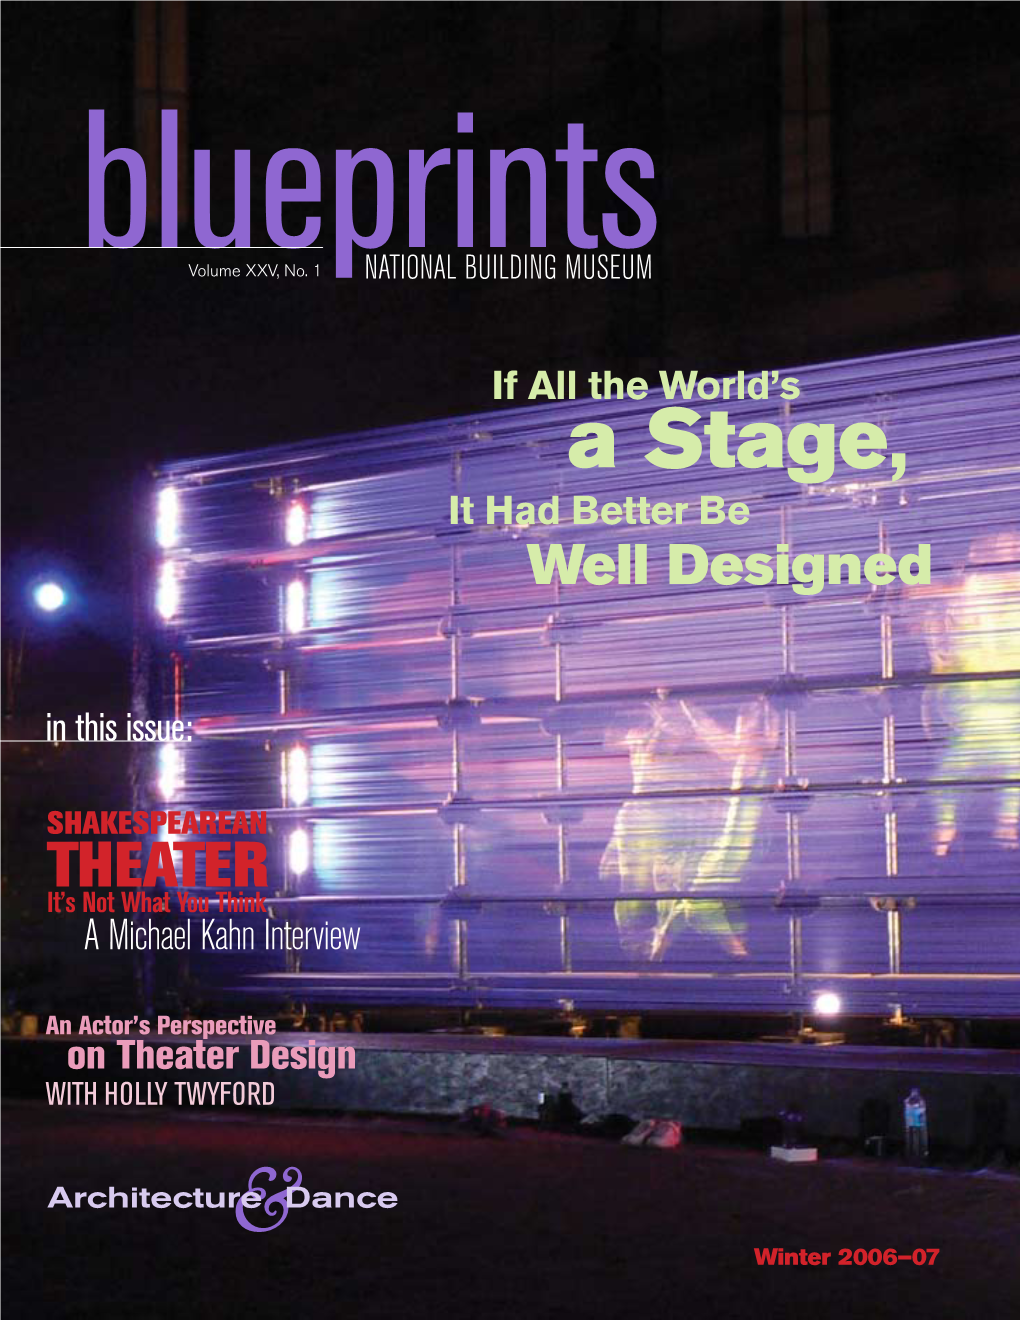 A Stage, It Had Better Be Well Designed in This Issue